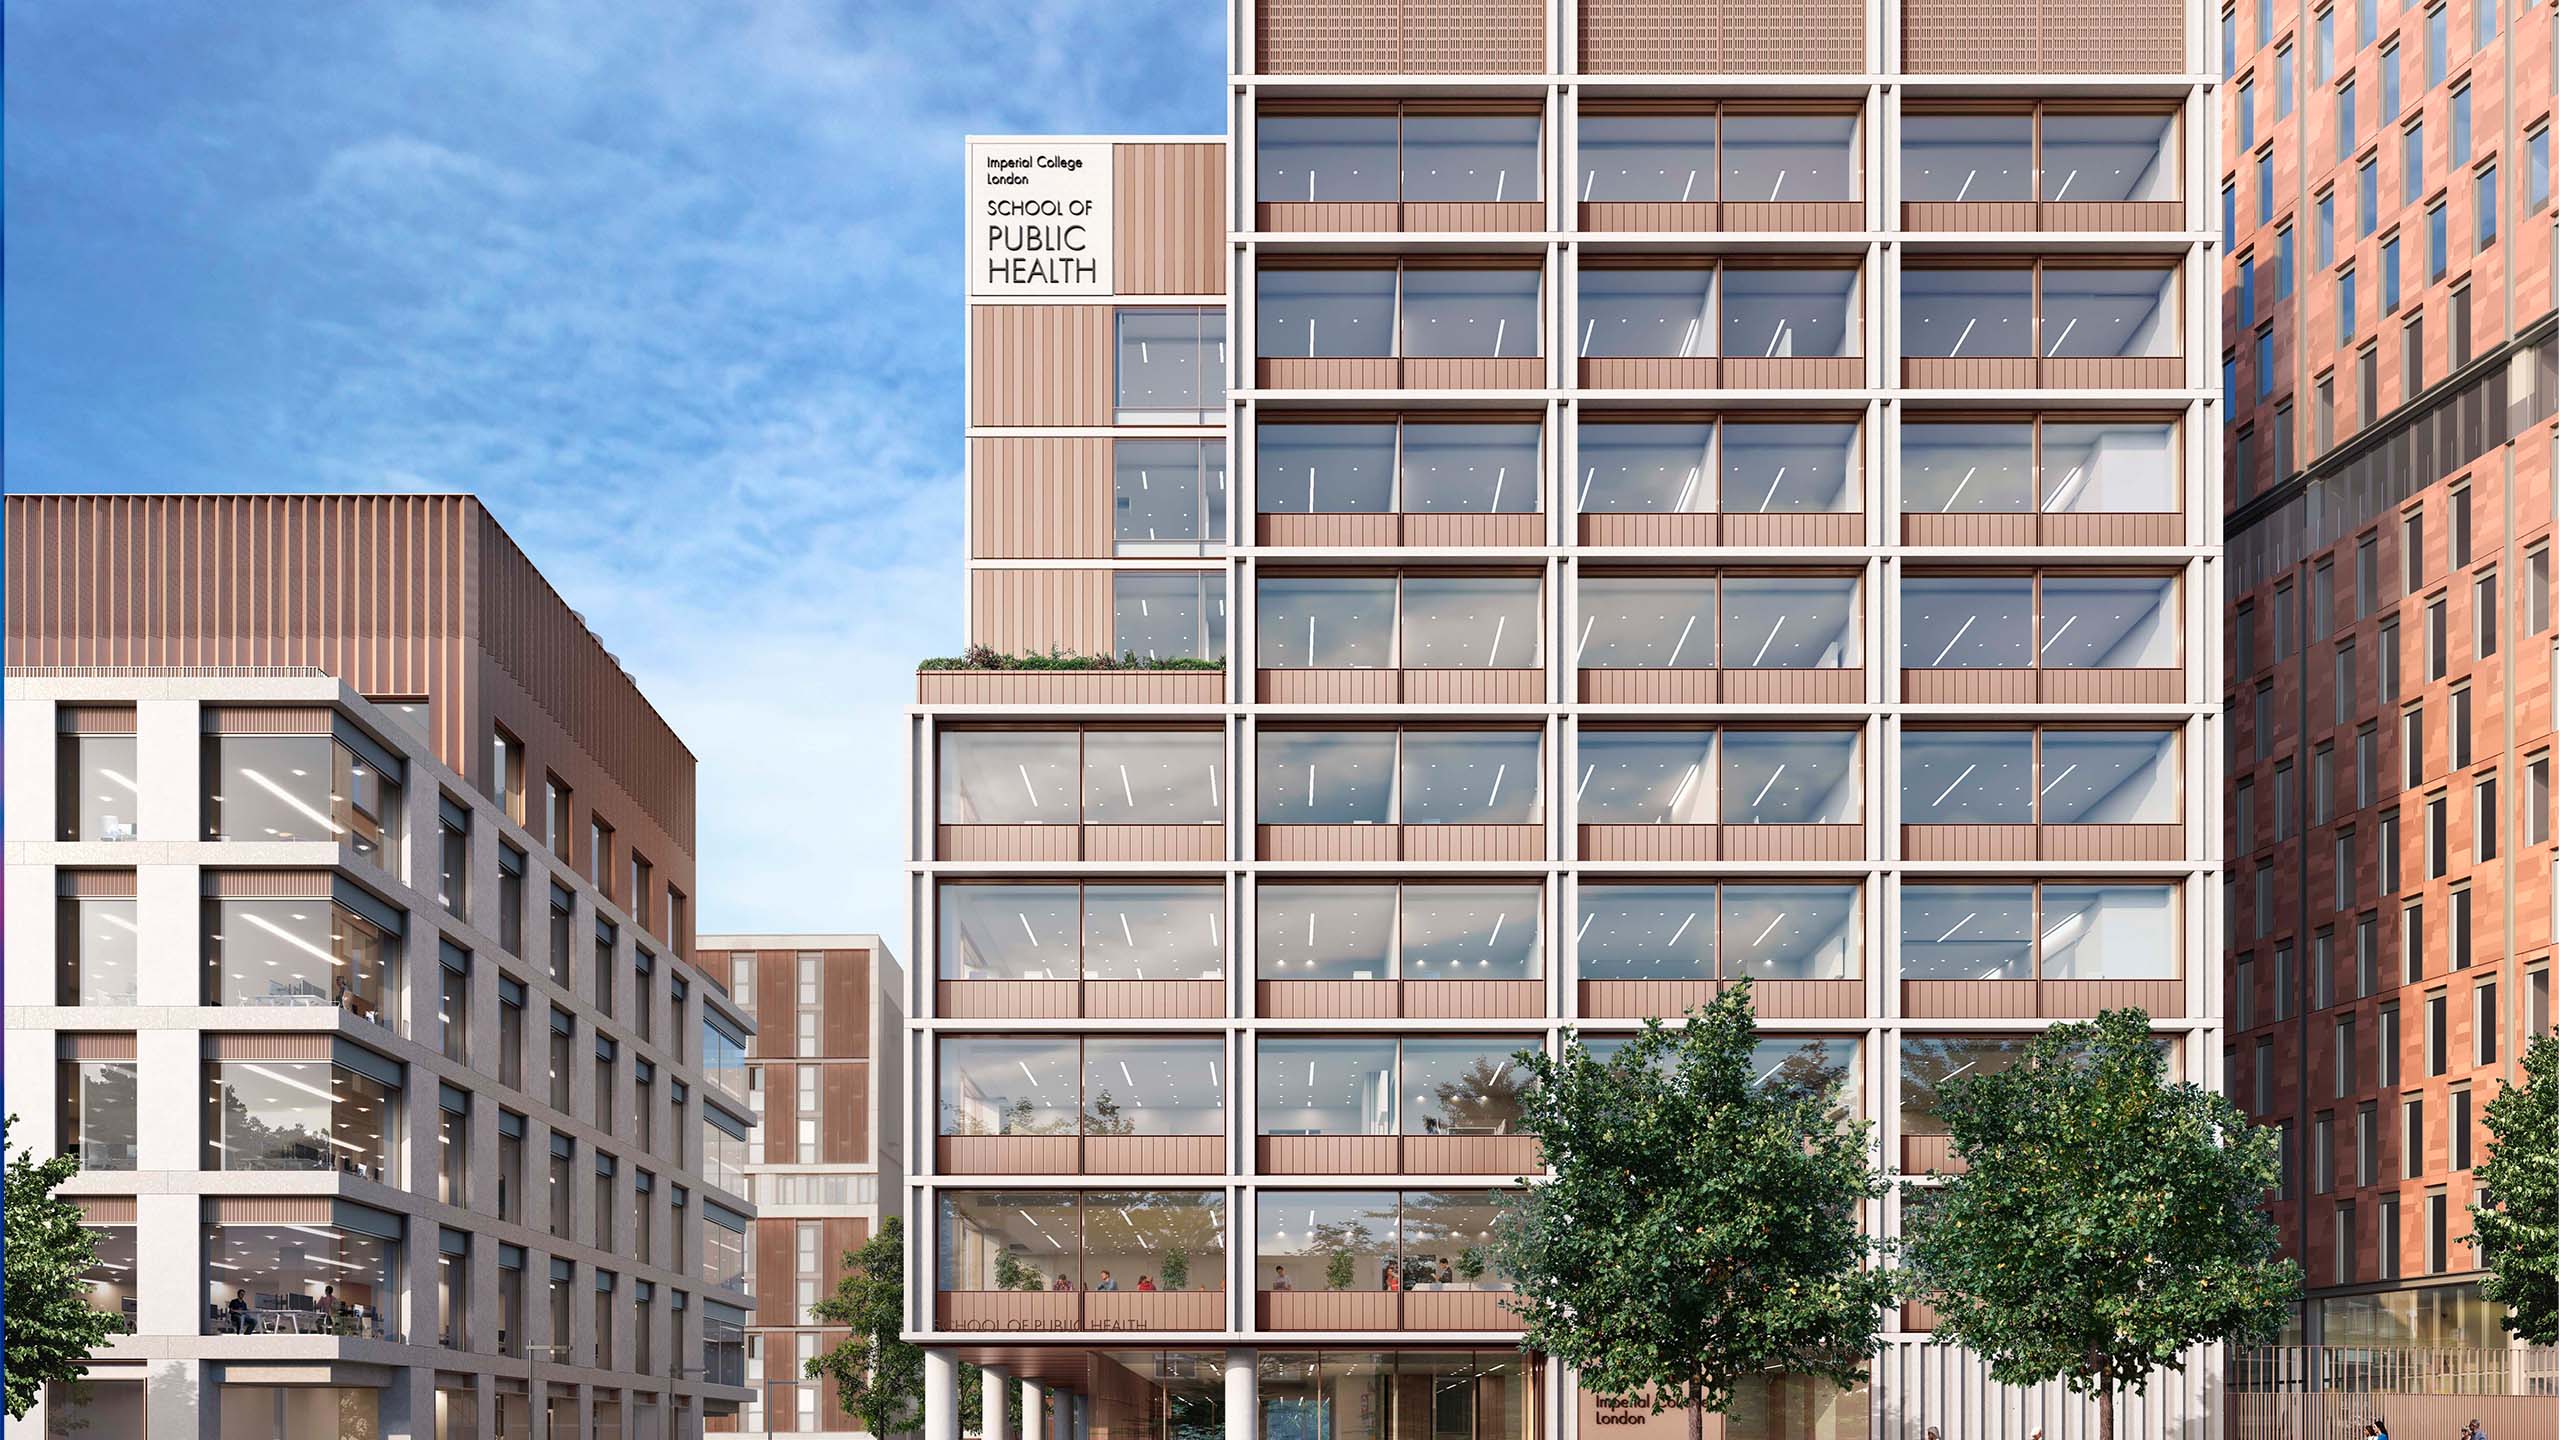 An architect's render of the planned School of Public Health building at imperial College London 